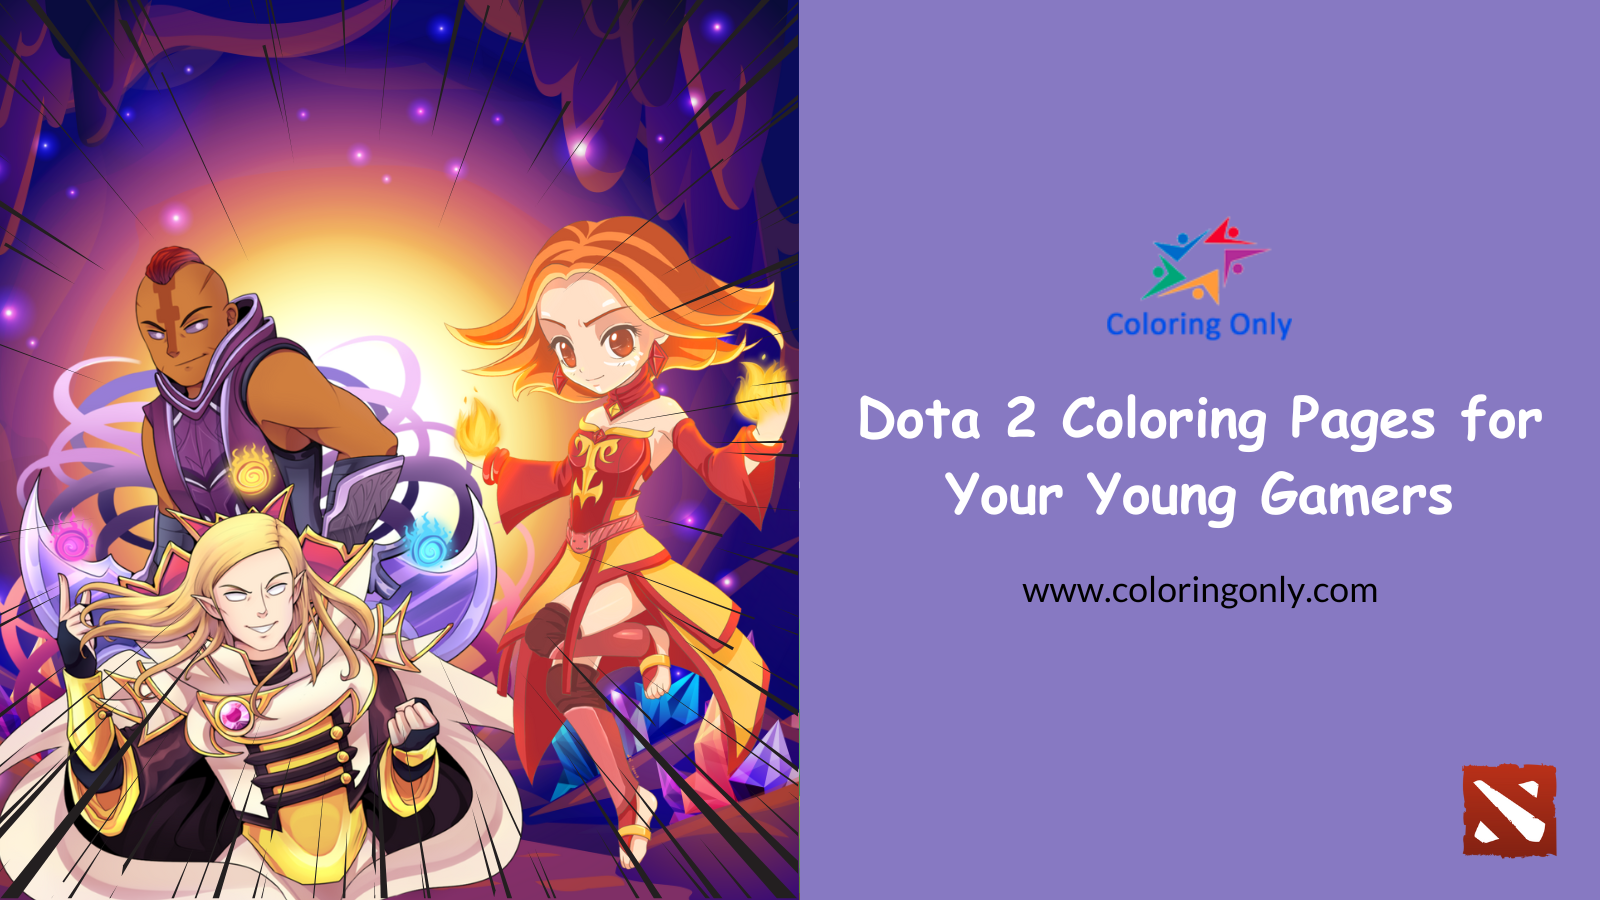 Dota 2 Coloring Pages for Your Young Gamers